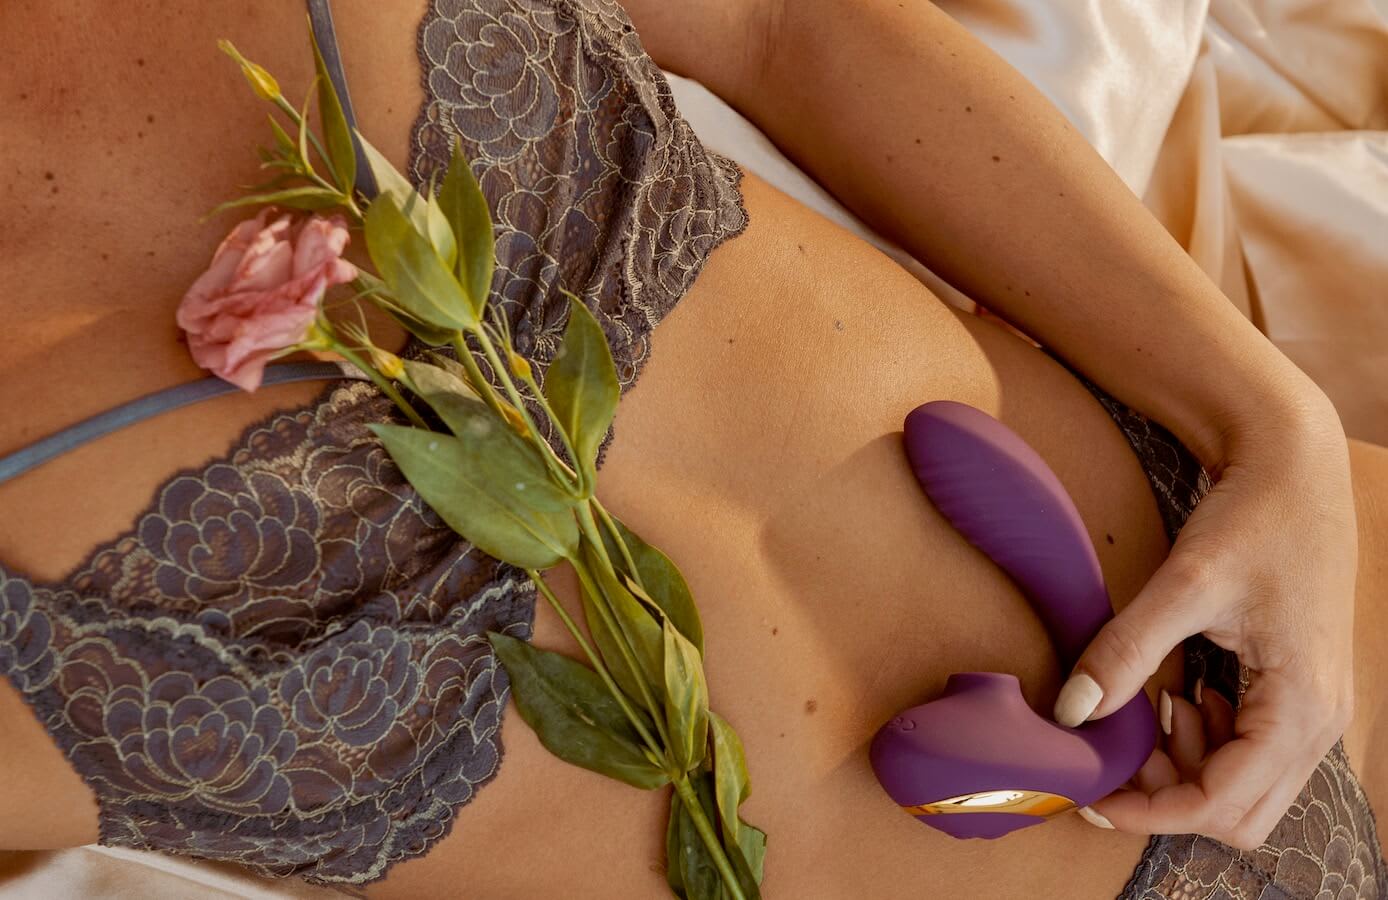 15 amazing sex toys to treat yourself to this Valentines Day Bellesa picture